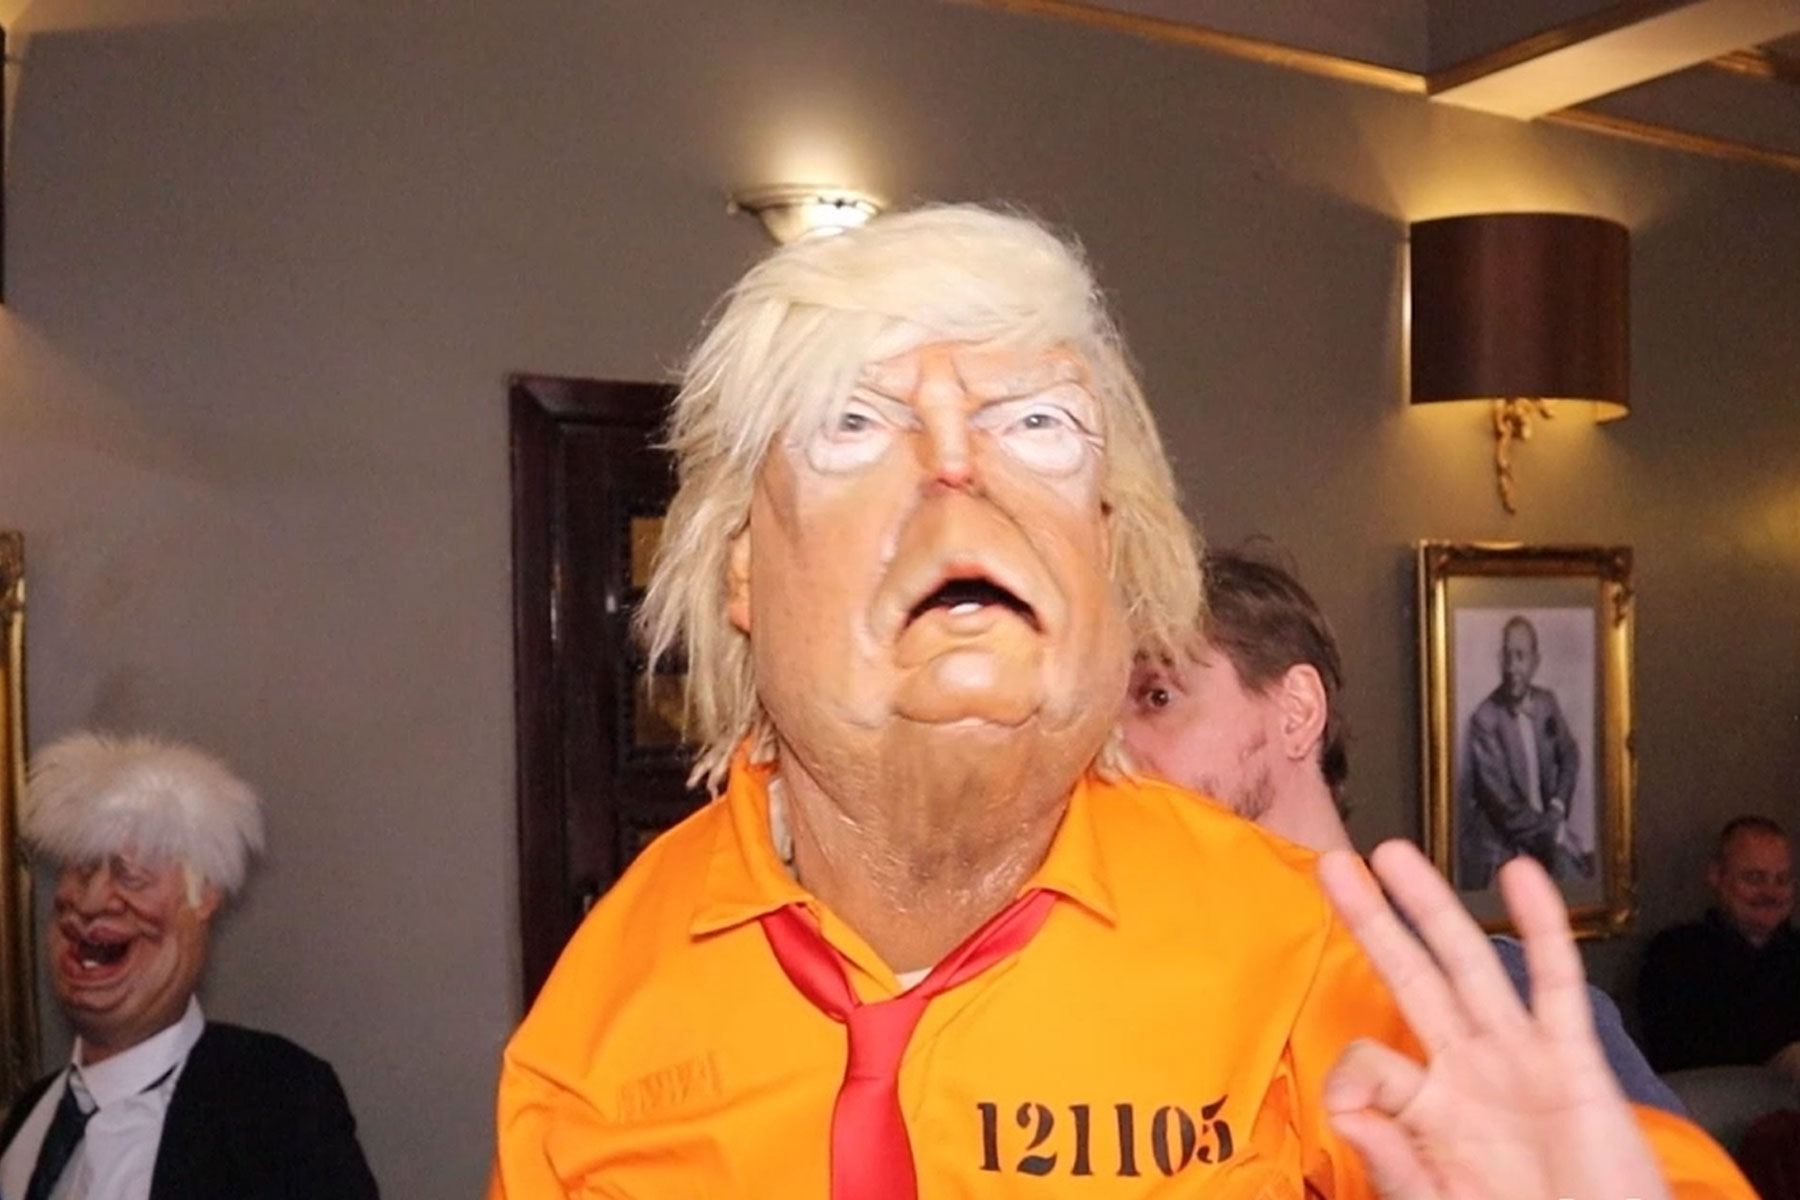 Spitting Image The Musical Donald Trump